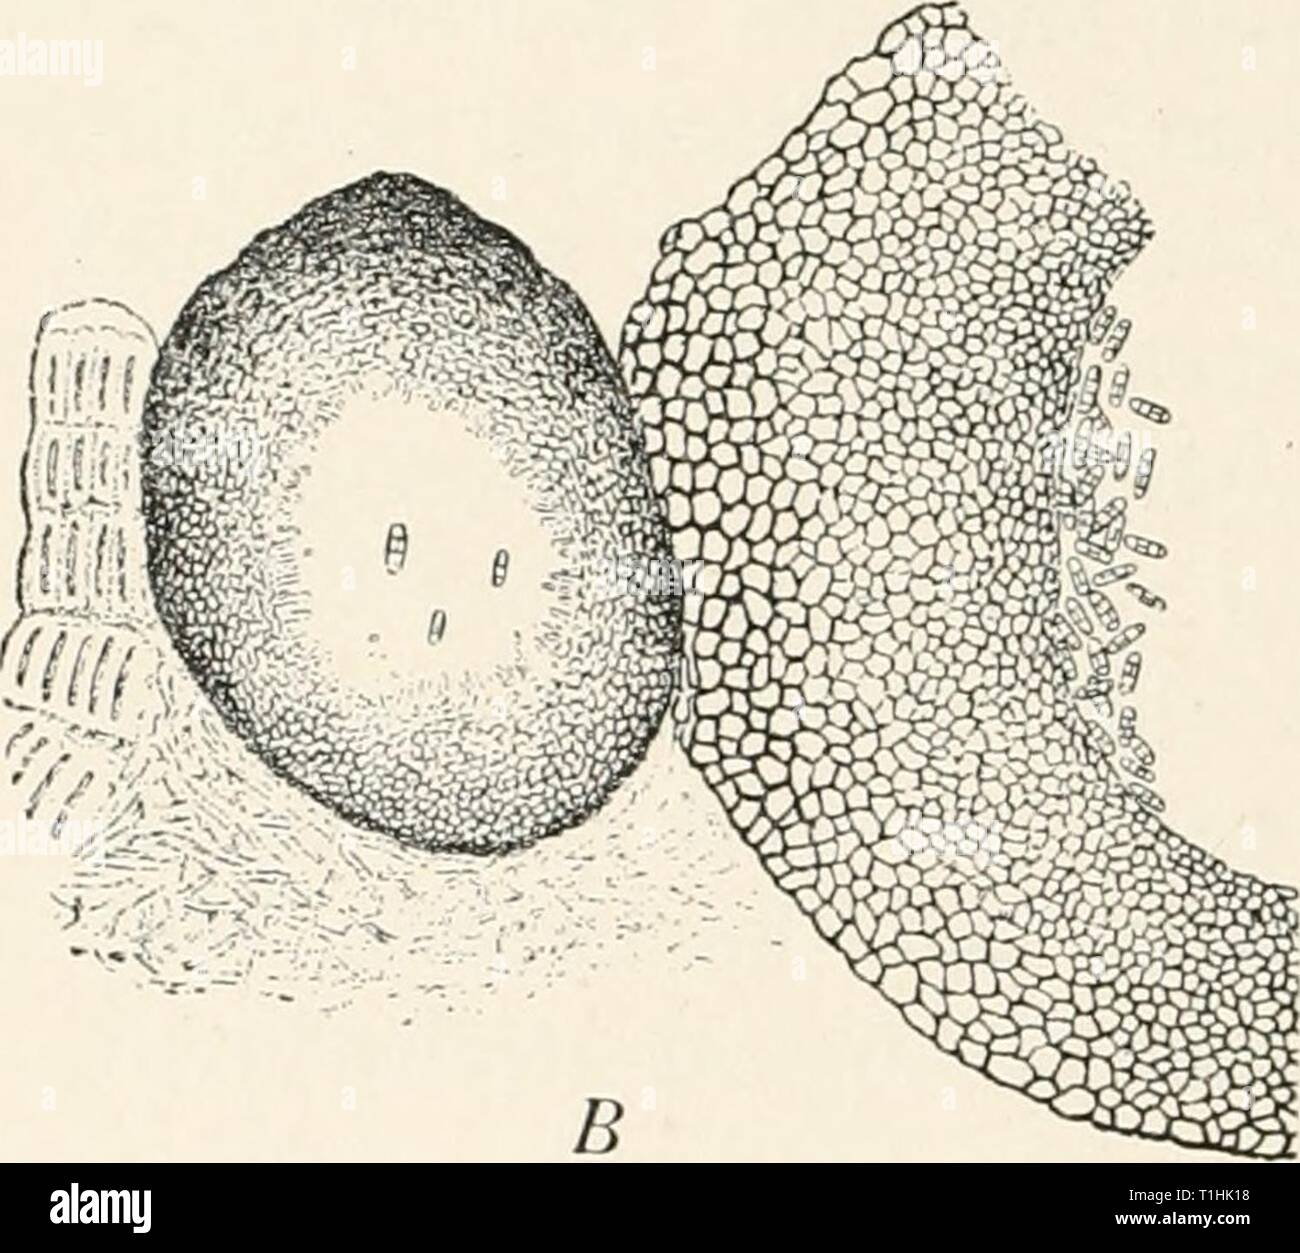 Diseases of plants induced by Diseases of plants induced by cryptogamuc parasites; introduction to the study of pathogenic fungi, slime-fungi, bacteria, and algae. English ed. by William G. Smith  diseasesofplants00tubeuoft Year: 1897  Fig. 99.—Cucurbitaria laburni.. A, Stroma with pycnidia containing minute unicellular conidia. B, One of the large smooth pycnidia. (After v. Tubeuf.) The mature perithecia have a peridium consisting of a loose pseudoparenchyma with a rough warty exterior and a pore set in a distinct depression (Fig. 100.) The paraphyses are long, strong threads, often branched, Stock Photo